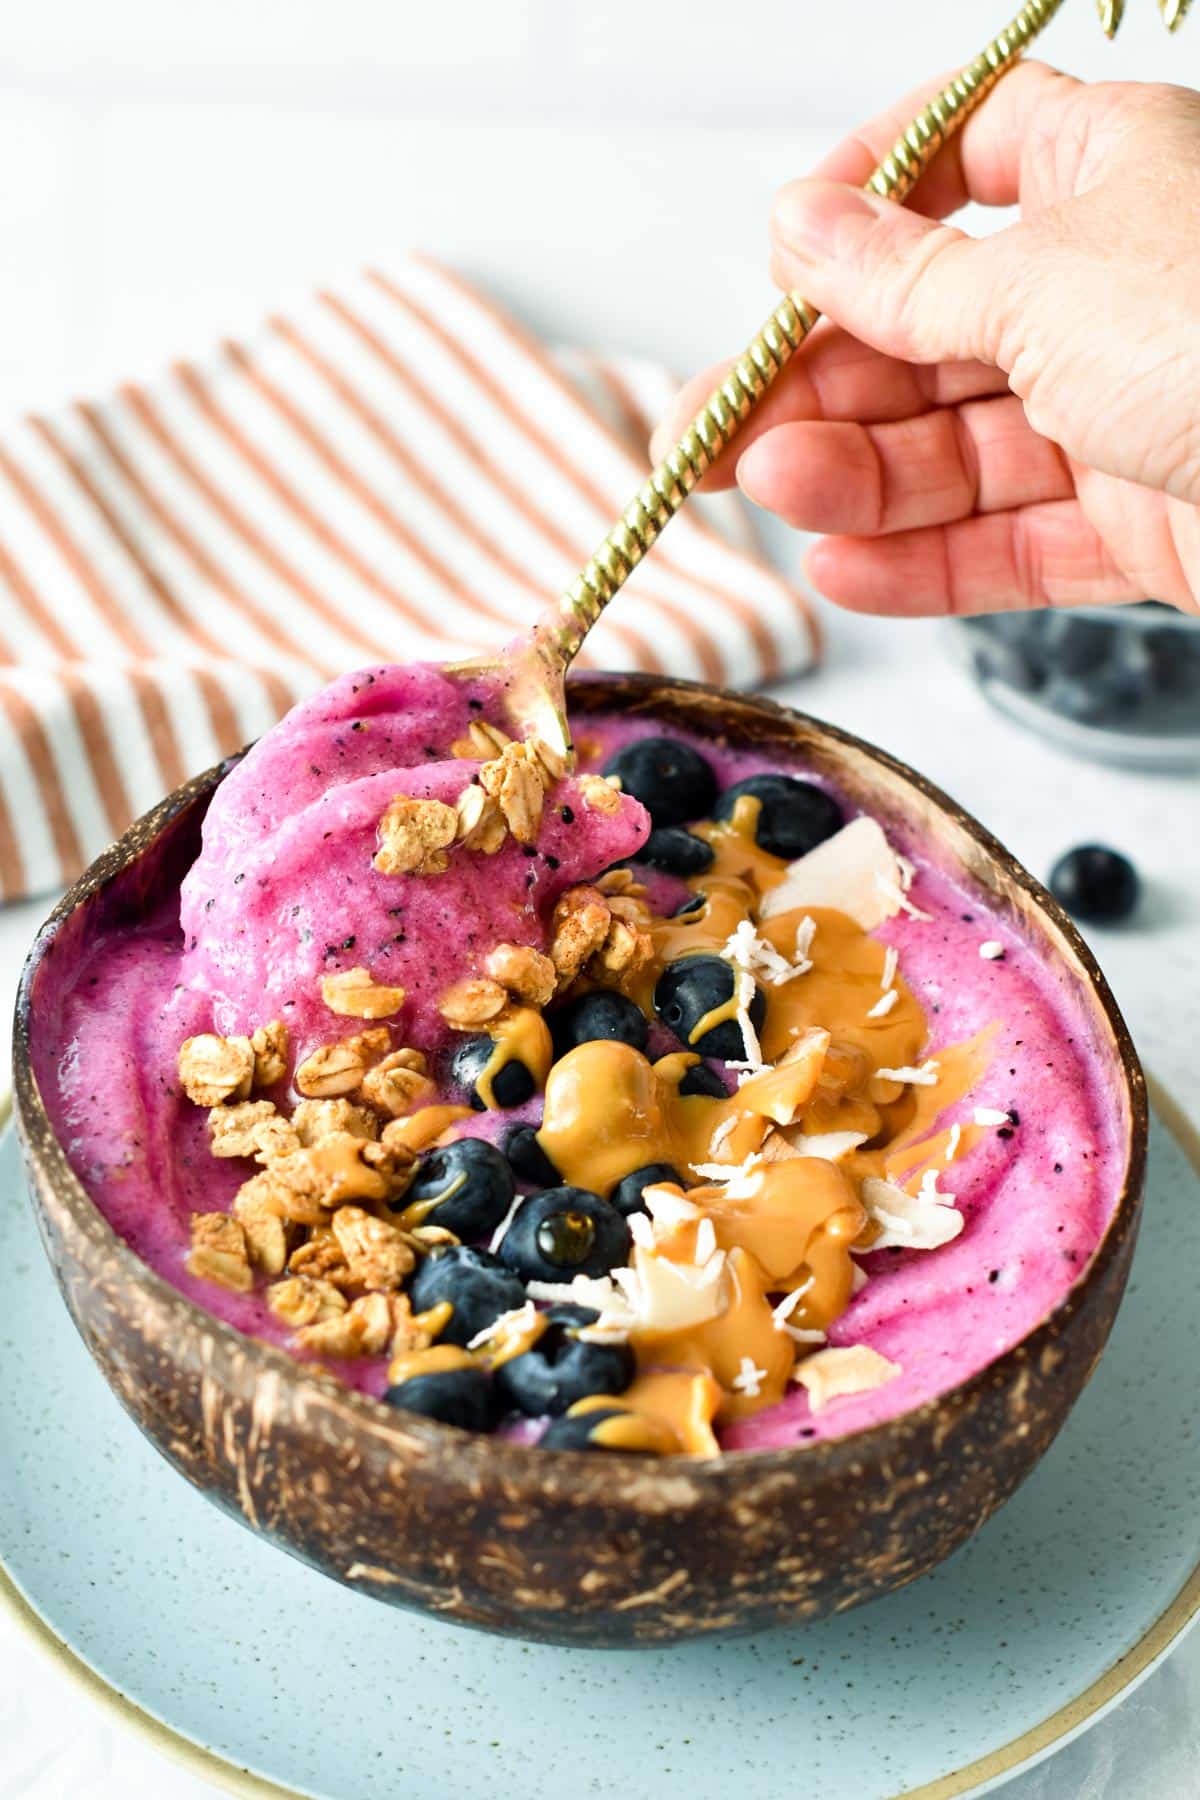 This Pitaya bowl is the most delicious frothy smoothie bowl to starts the day with vitamin C and feel energize all day. Plus, this dragon fruit bowl takes barely 5 minutes to make and require only 3 ingredients so even the kids can make this alone.